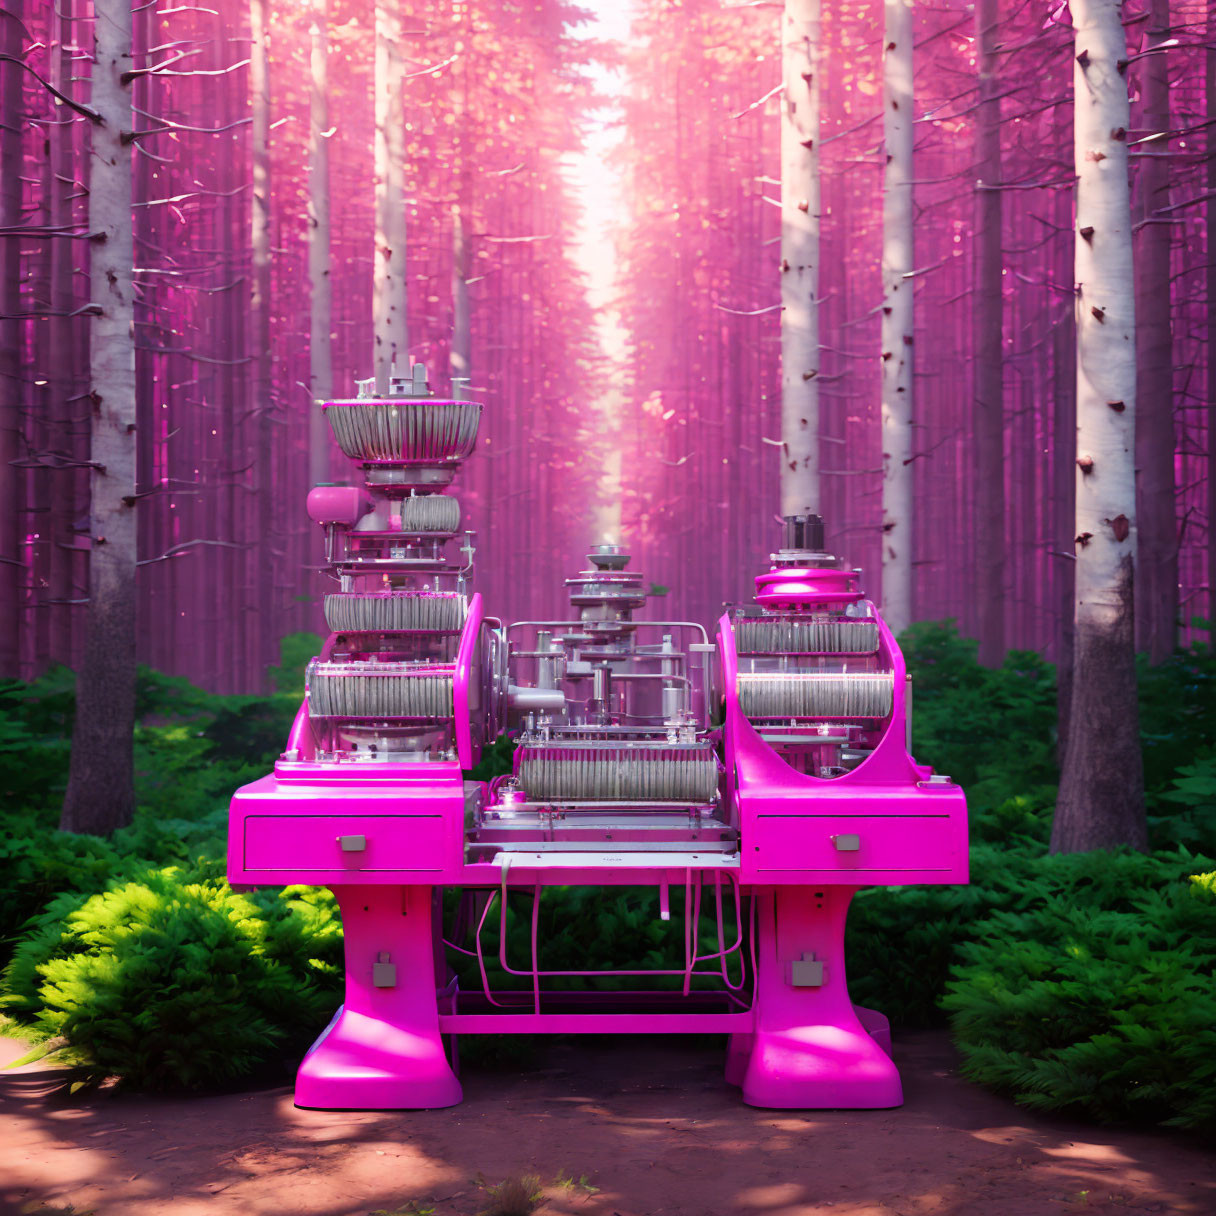 Pink industrial machine in misty forest with tall trees and sunlight.